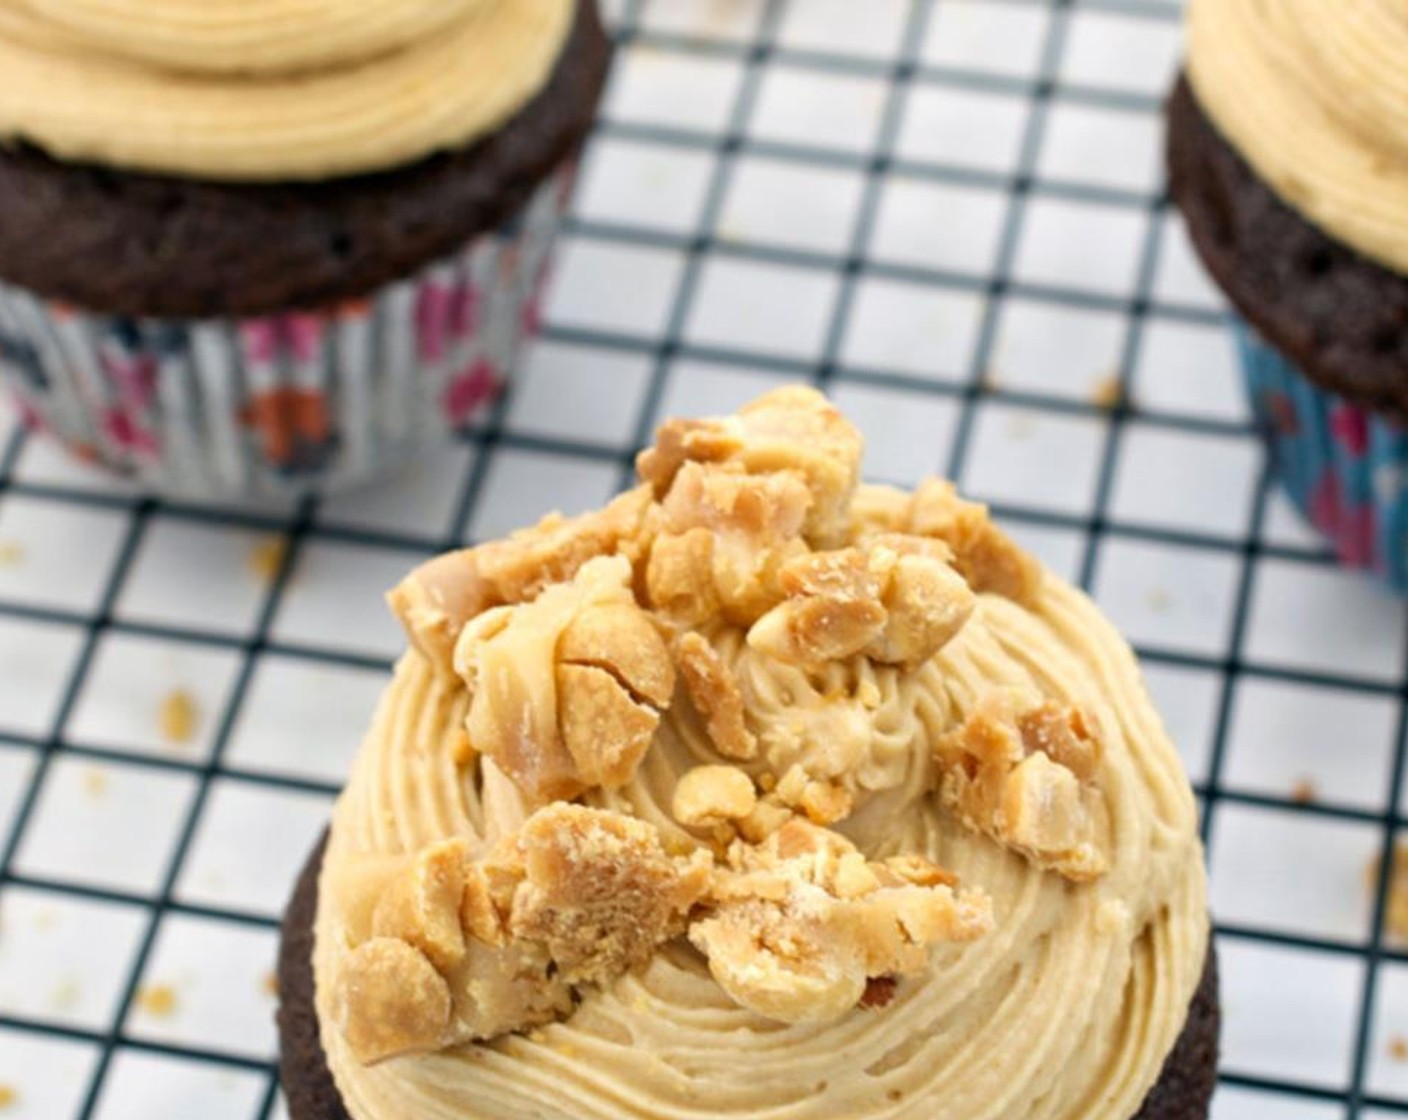 step 7 Top each cupcake with PayDay Candy Bars (2) crumbles. Serve immediately or refrigerate until ready to eat.